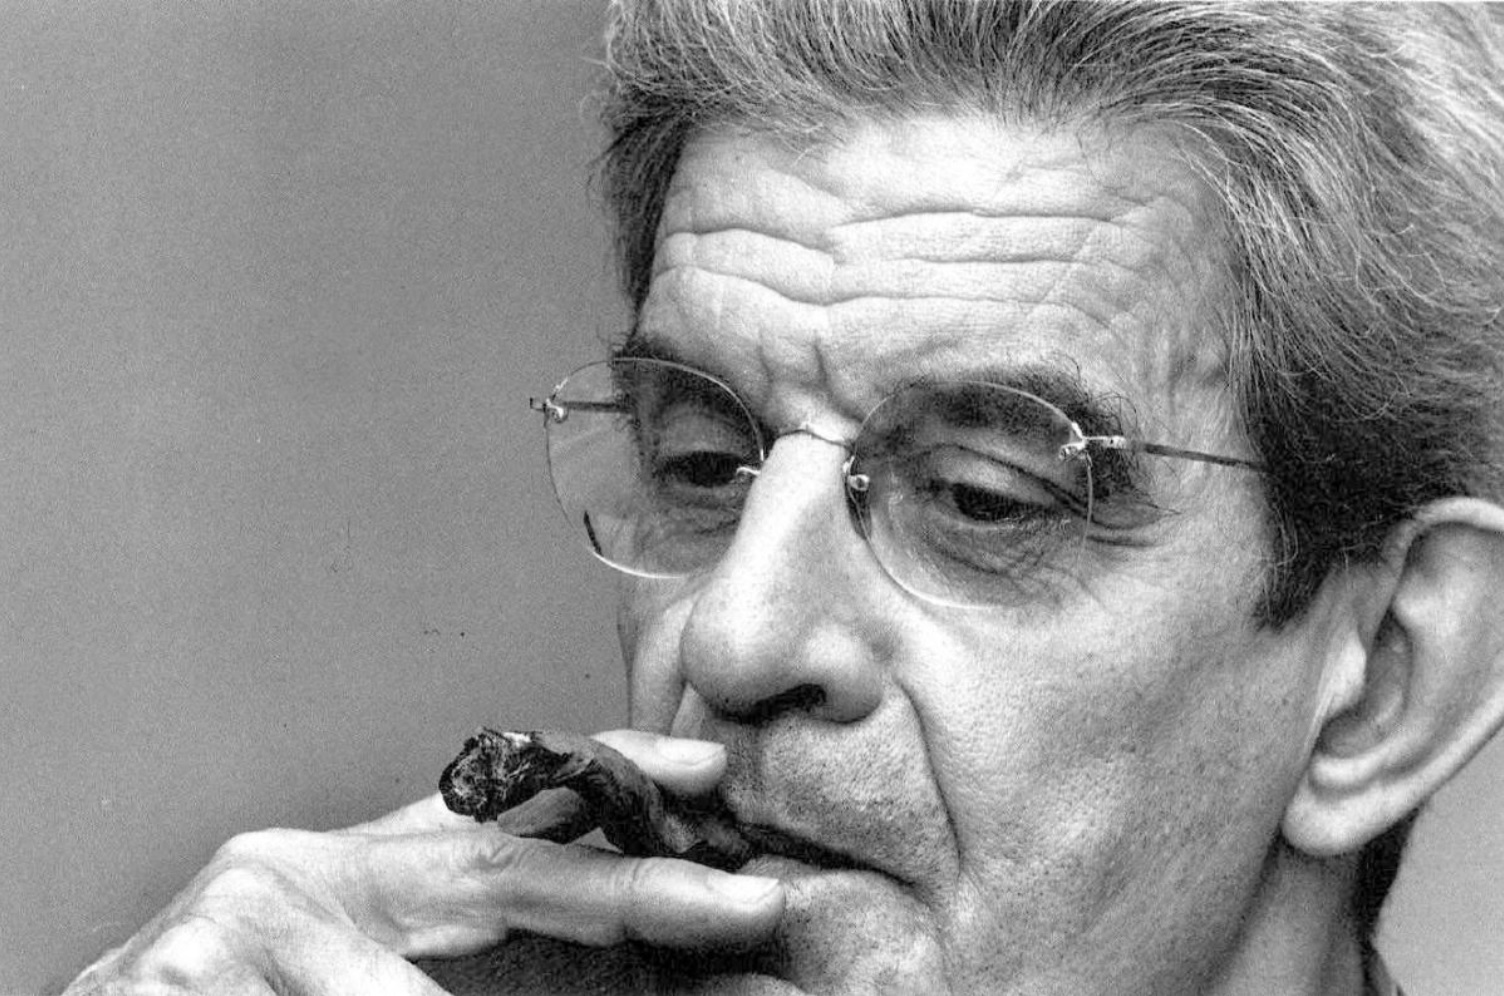 Jacques-lacan-critical-evaluations-in-cultural-theory-by-slavoj-zizek.jpg